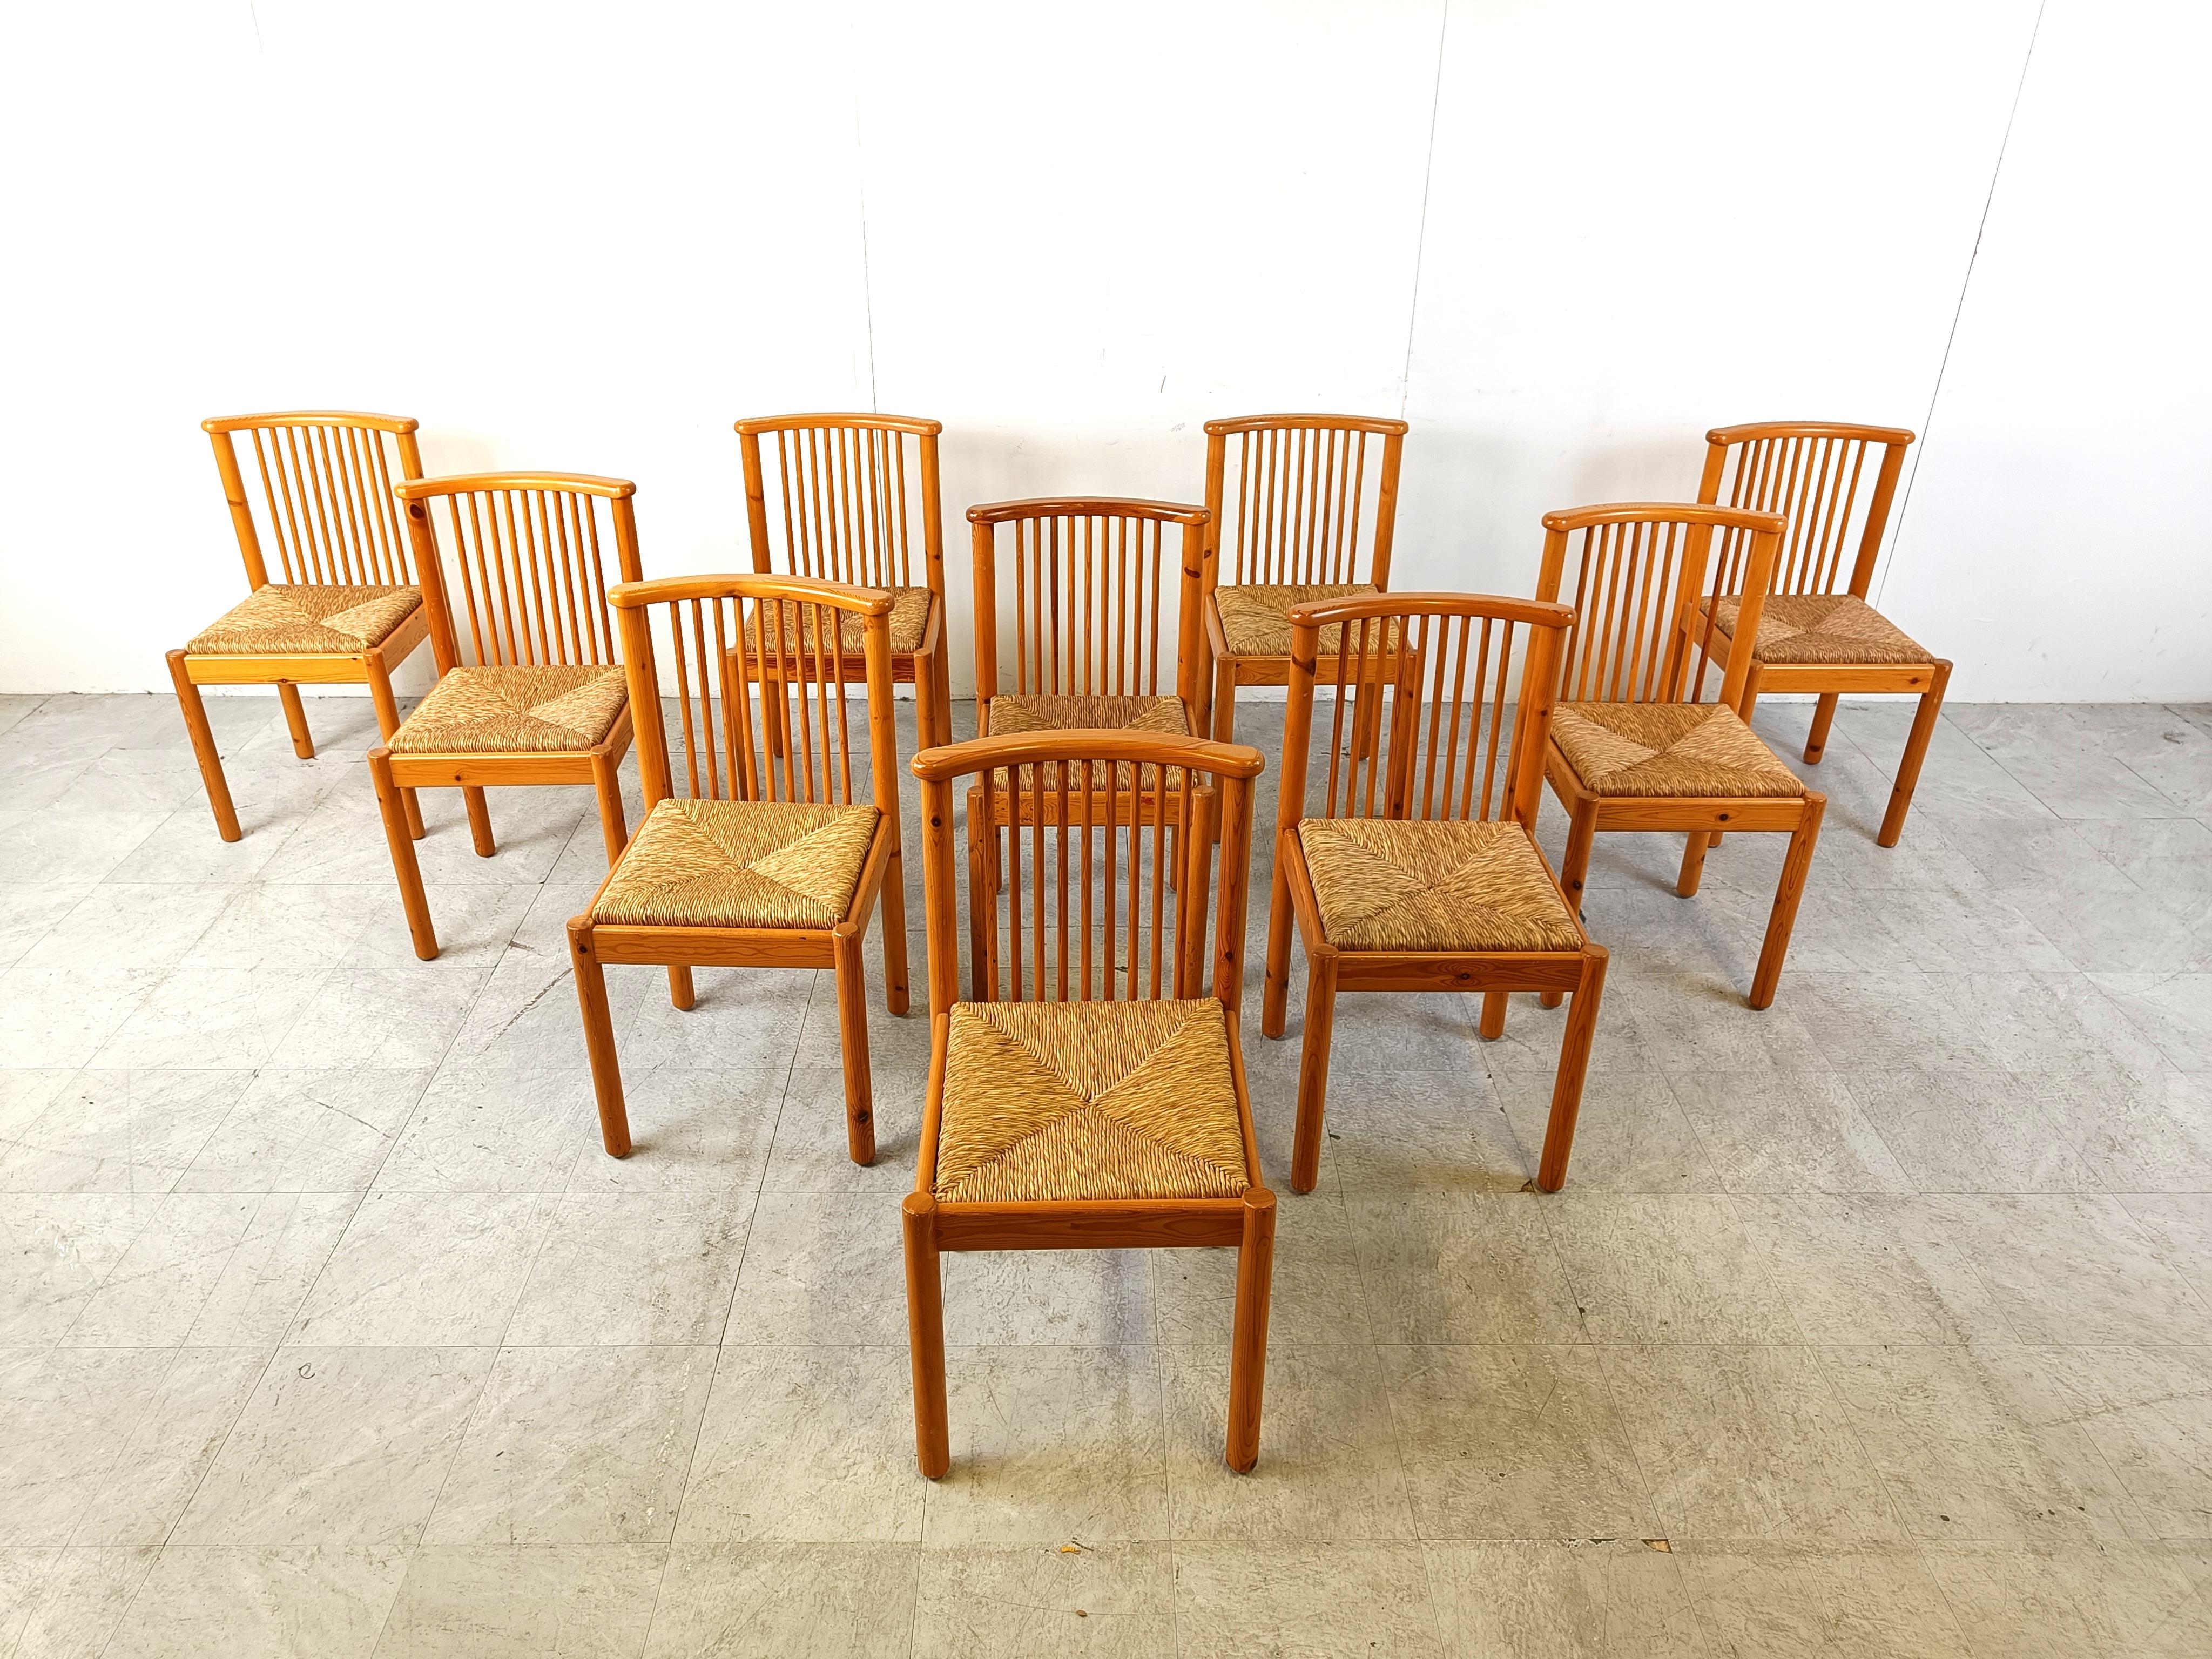 Beautifully crafted mid century dining chairs made from pine wood with wicker seats.

The curved backrests with spindles looks great.

They come as a set of 10.

1970s - Denmark

Very good condition


Dimensions:
Height: 83cm
Width x depth: